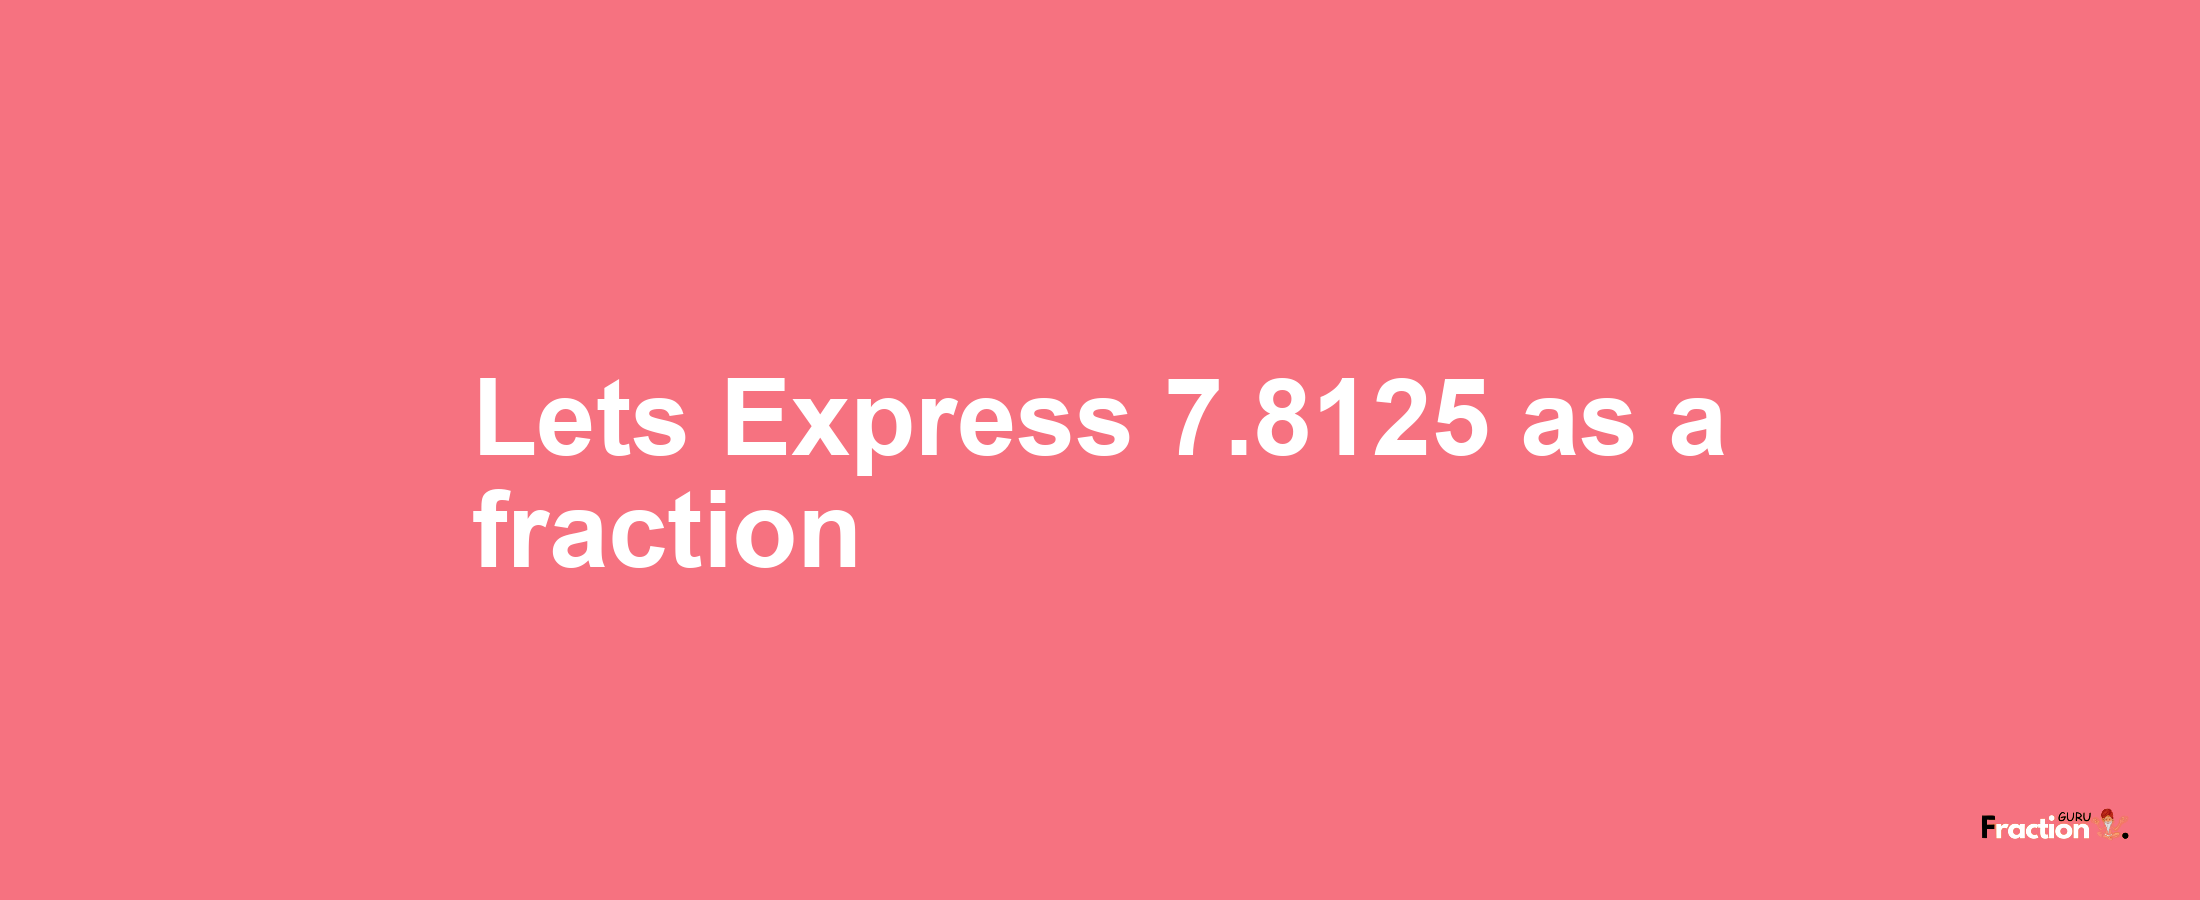 Lets Express 7.8125 as afraction